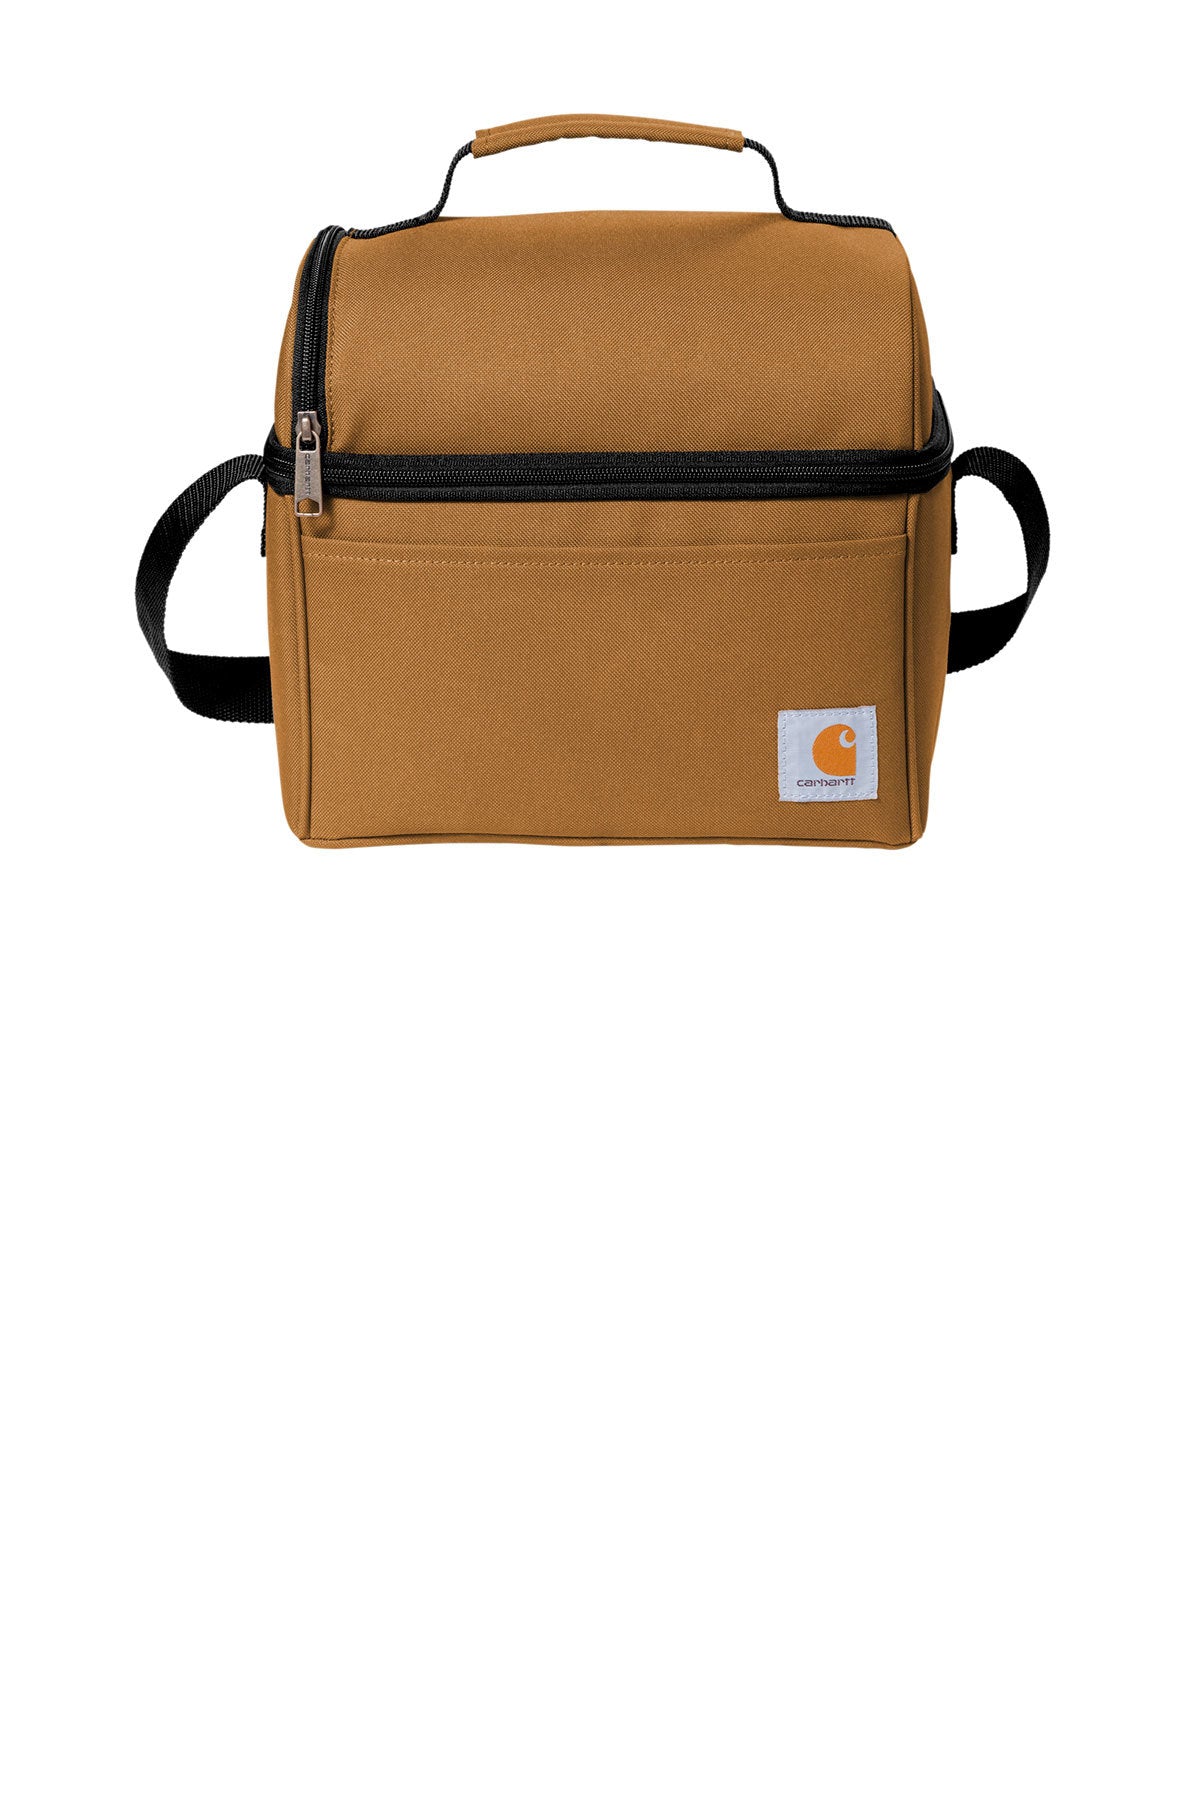 Carhartt® - Lunch 6-Can Cooler - CT89251601